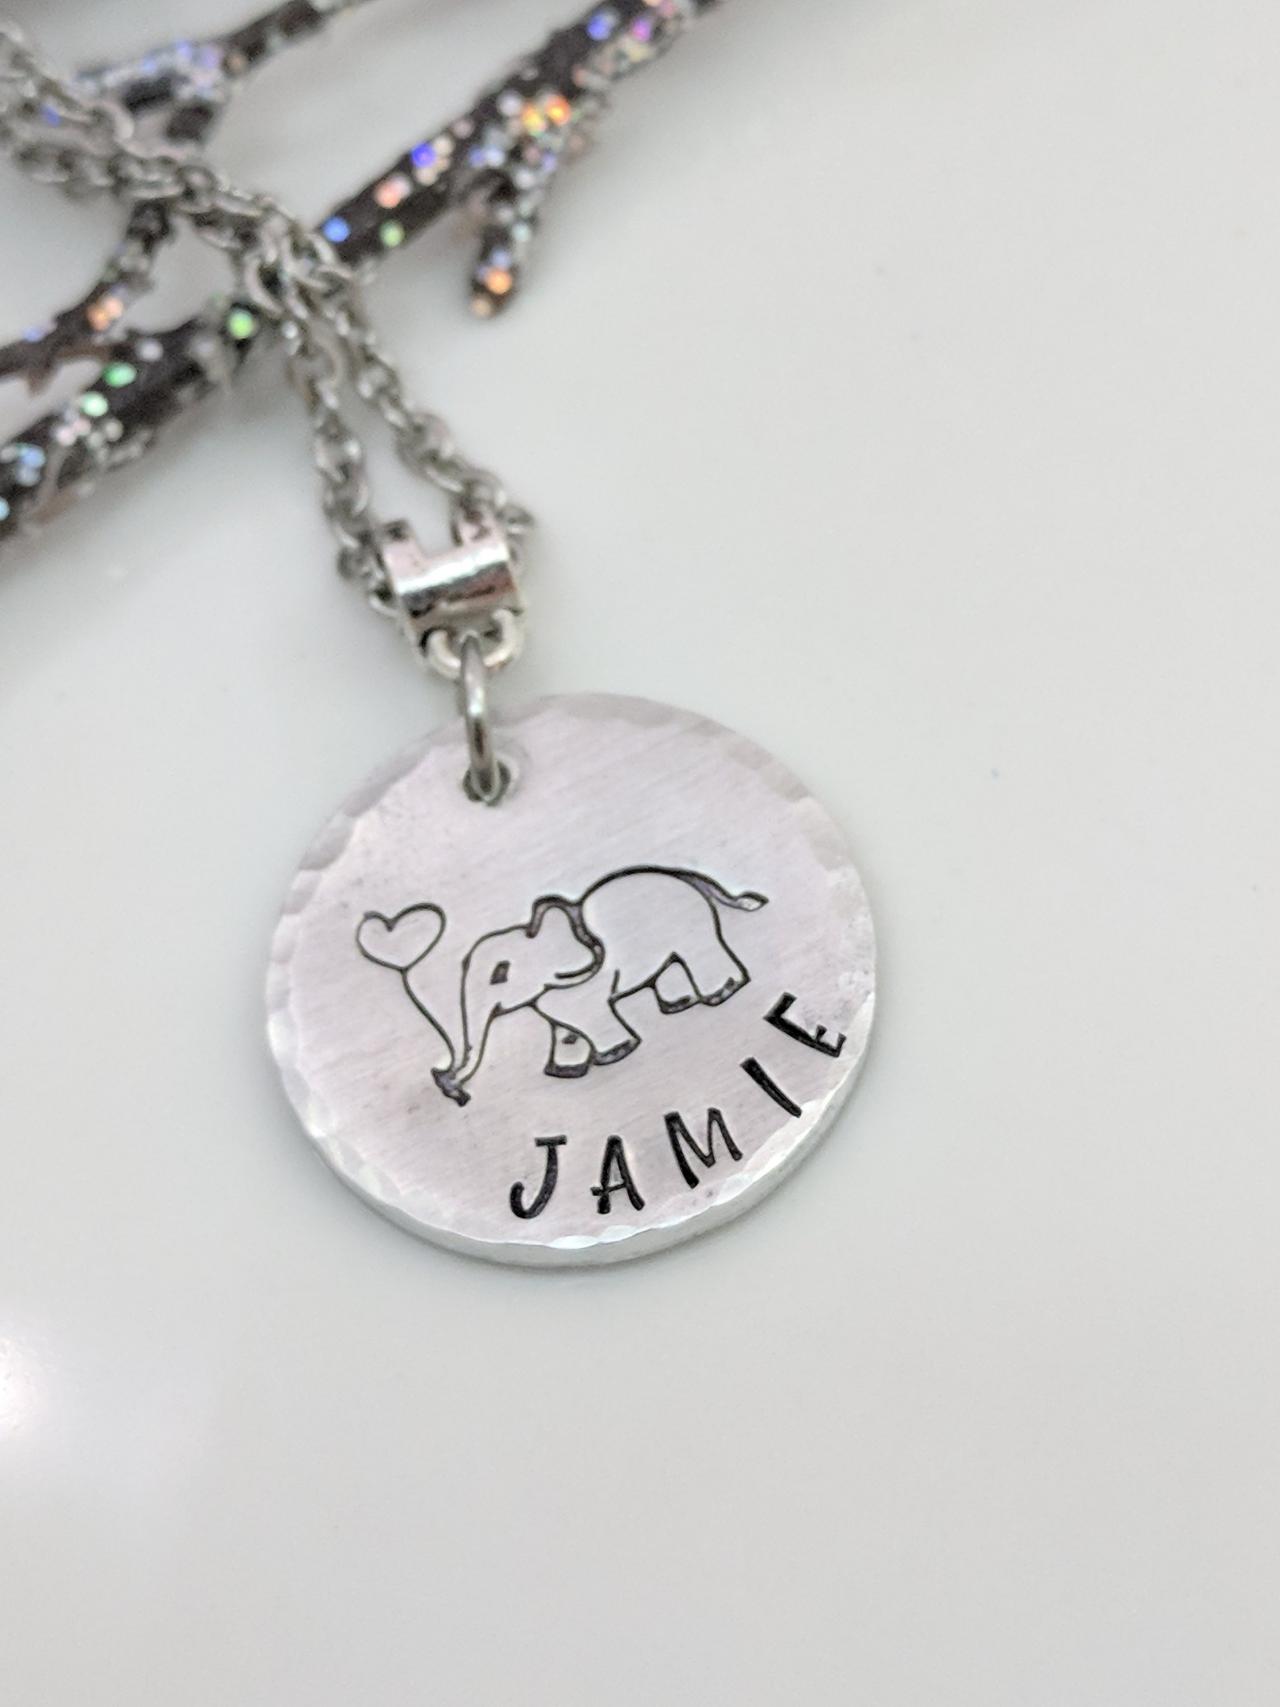 Personalized Elephant Hand Stamped Necklace-name Jewelry- Friends Gift-birthday Gift-elephant Lover-handmade Necklace-gift For Her-elephant Gifts